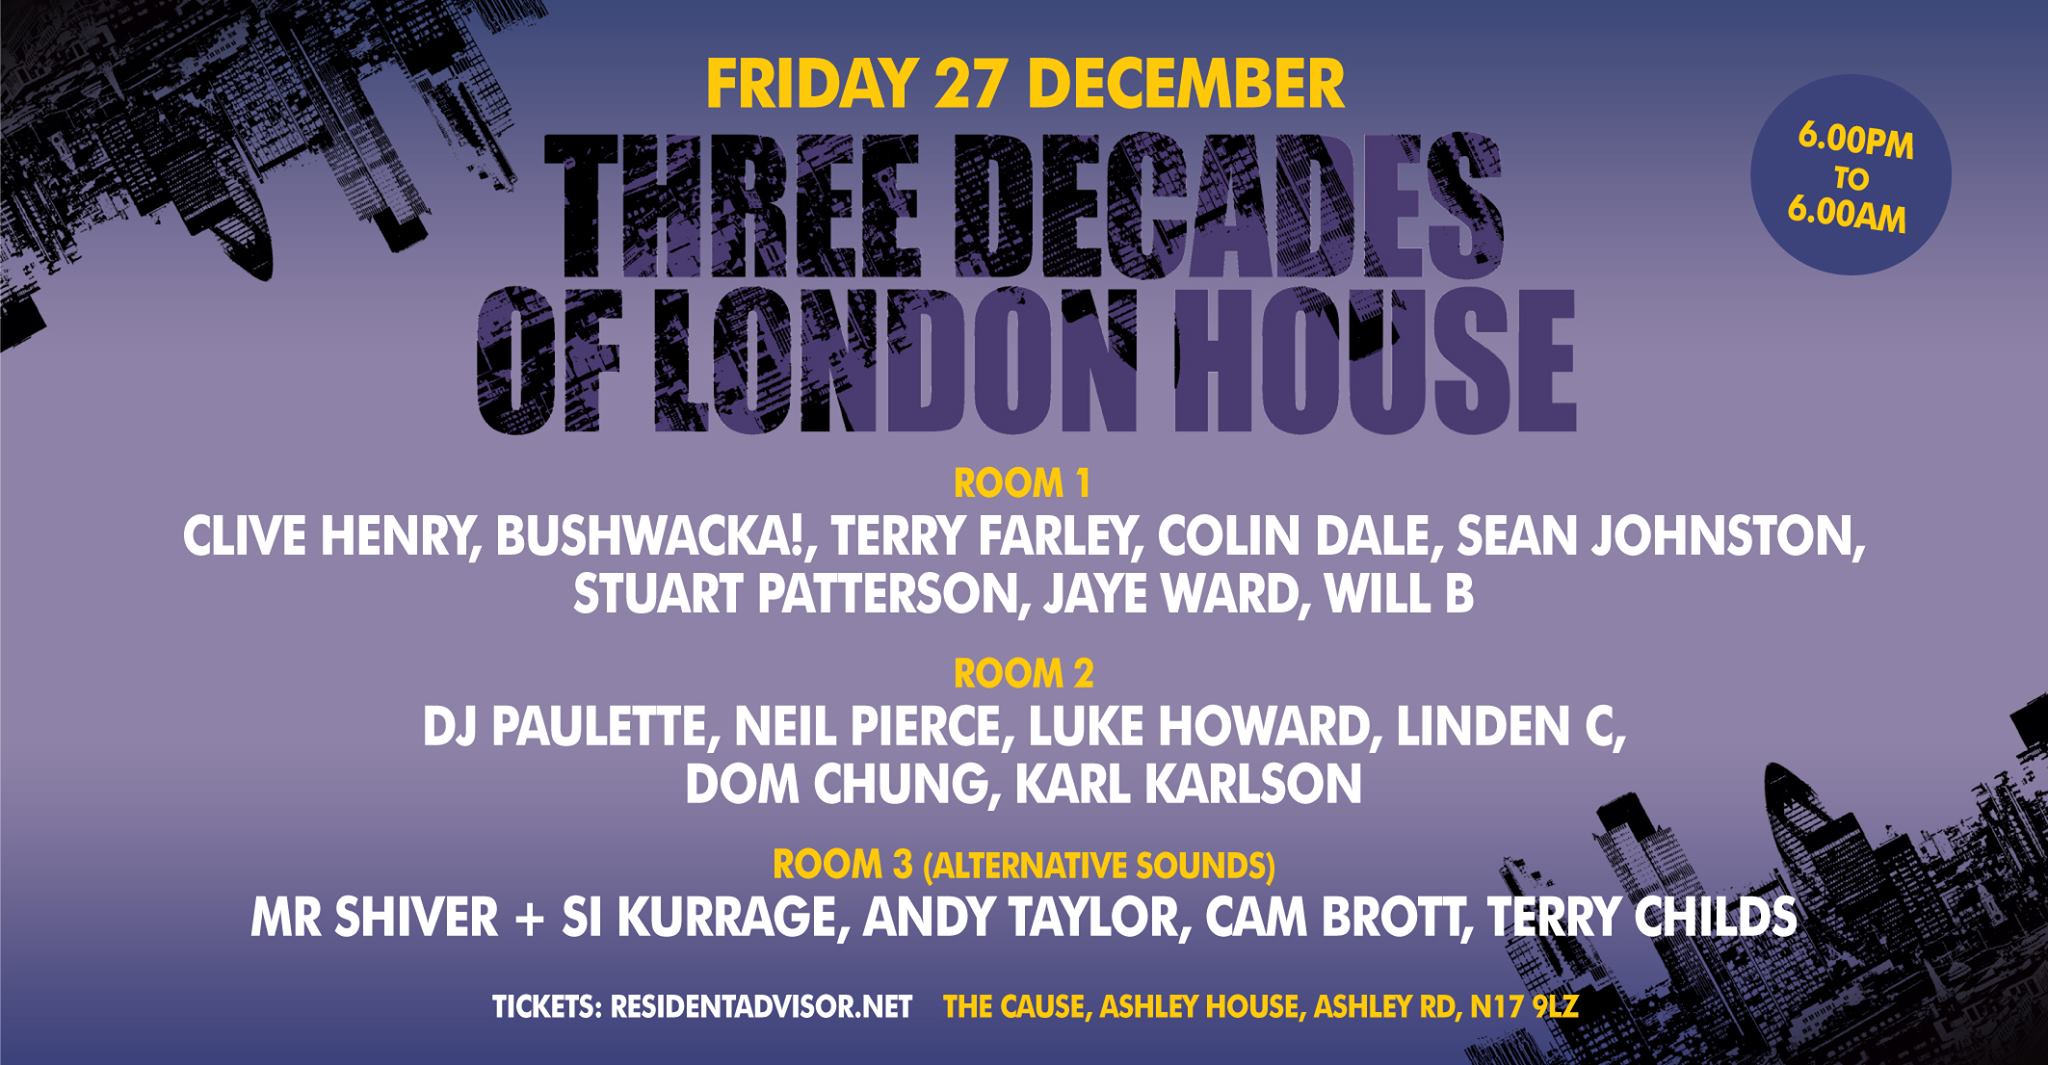 #YOURPARTYPLANNER – CHRISTMAS VIBES 2! THREE DECADES OF LONDON HOUSE, THE CAUSE 27122019